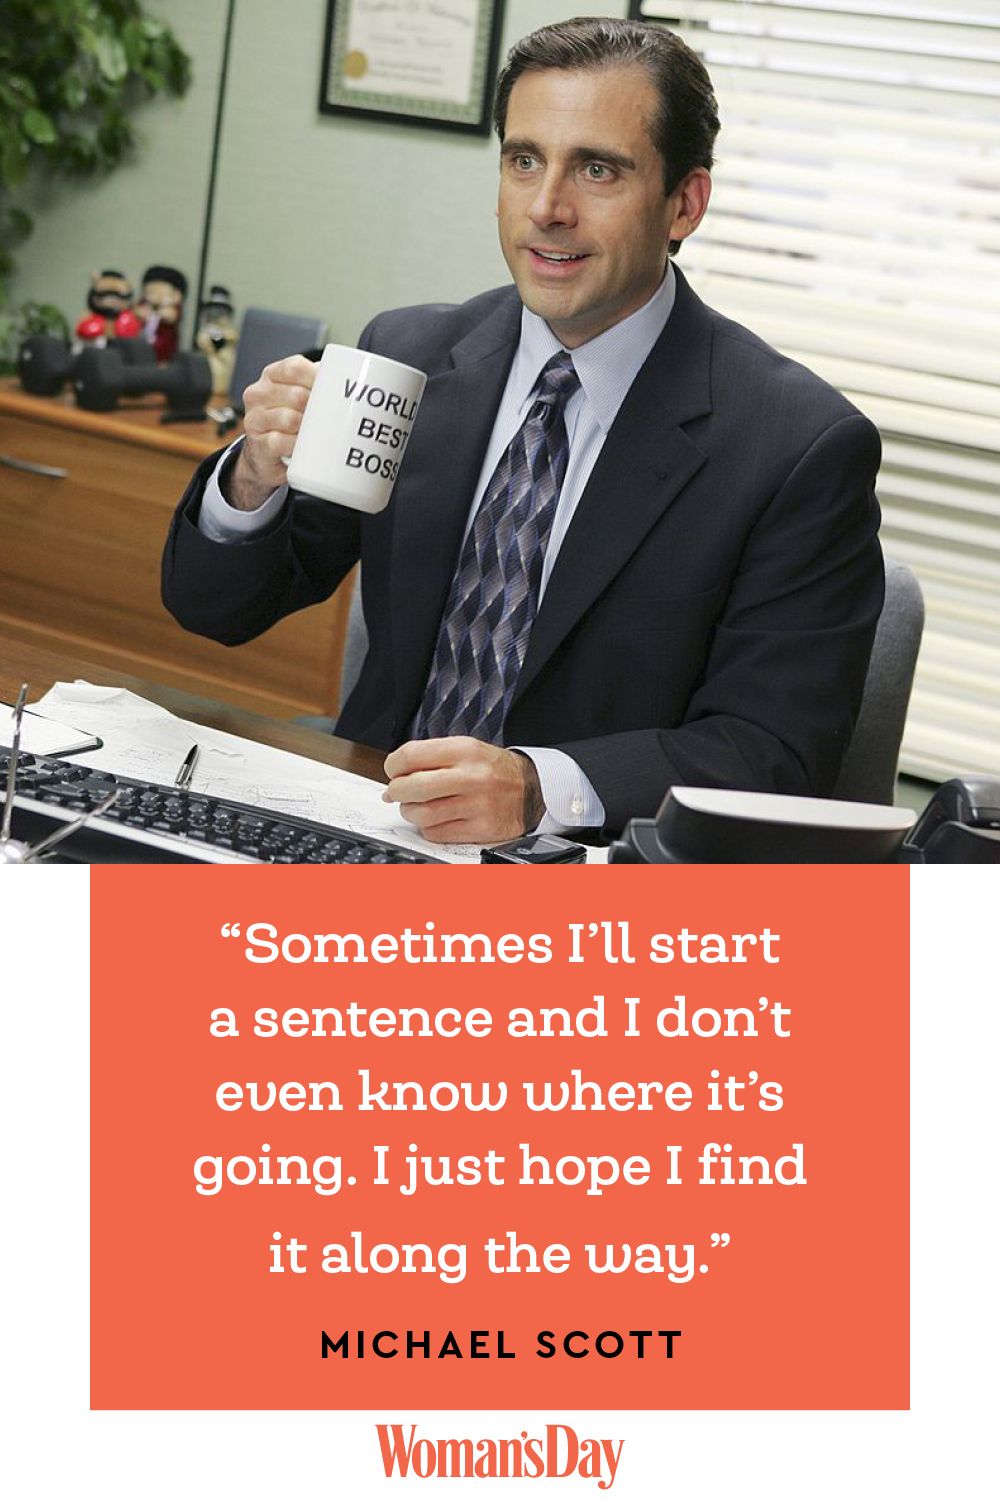 The Office' Quotes About Work — Best Quotes From 'The Office'